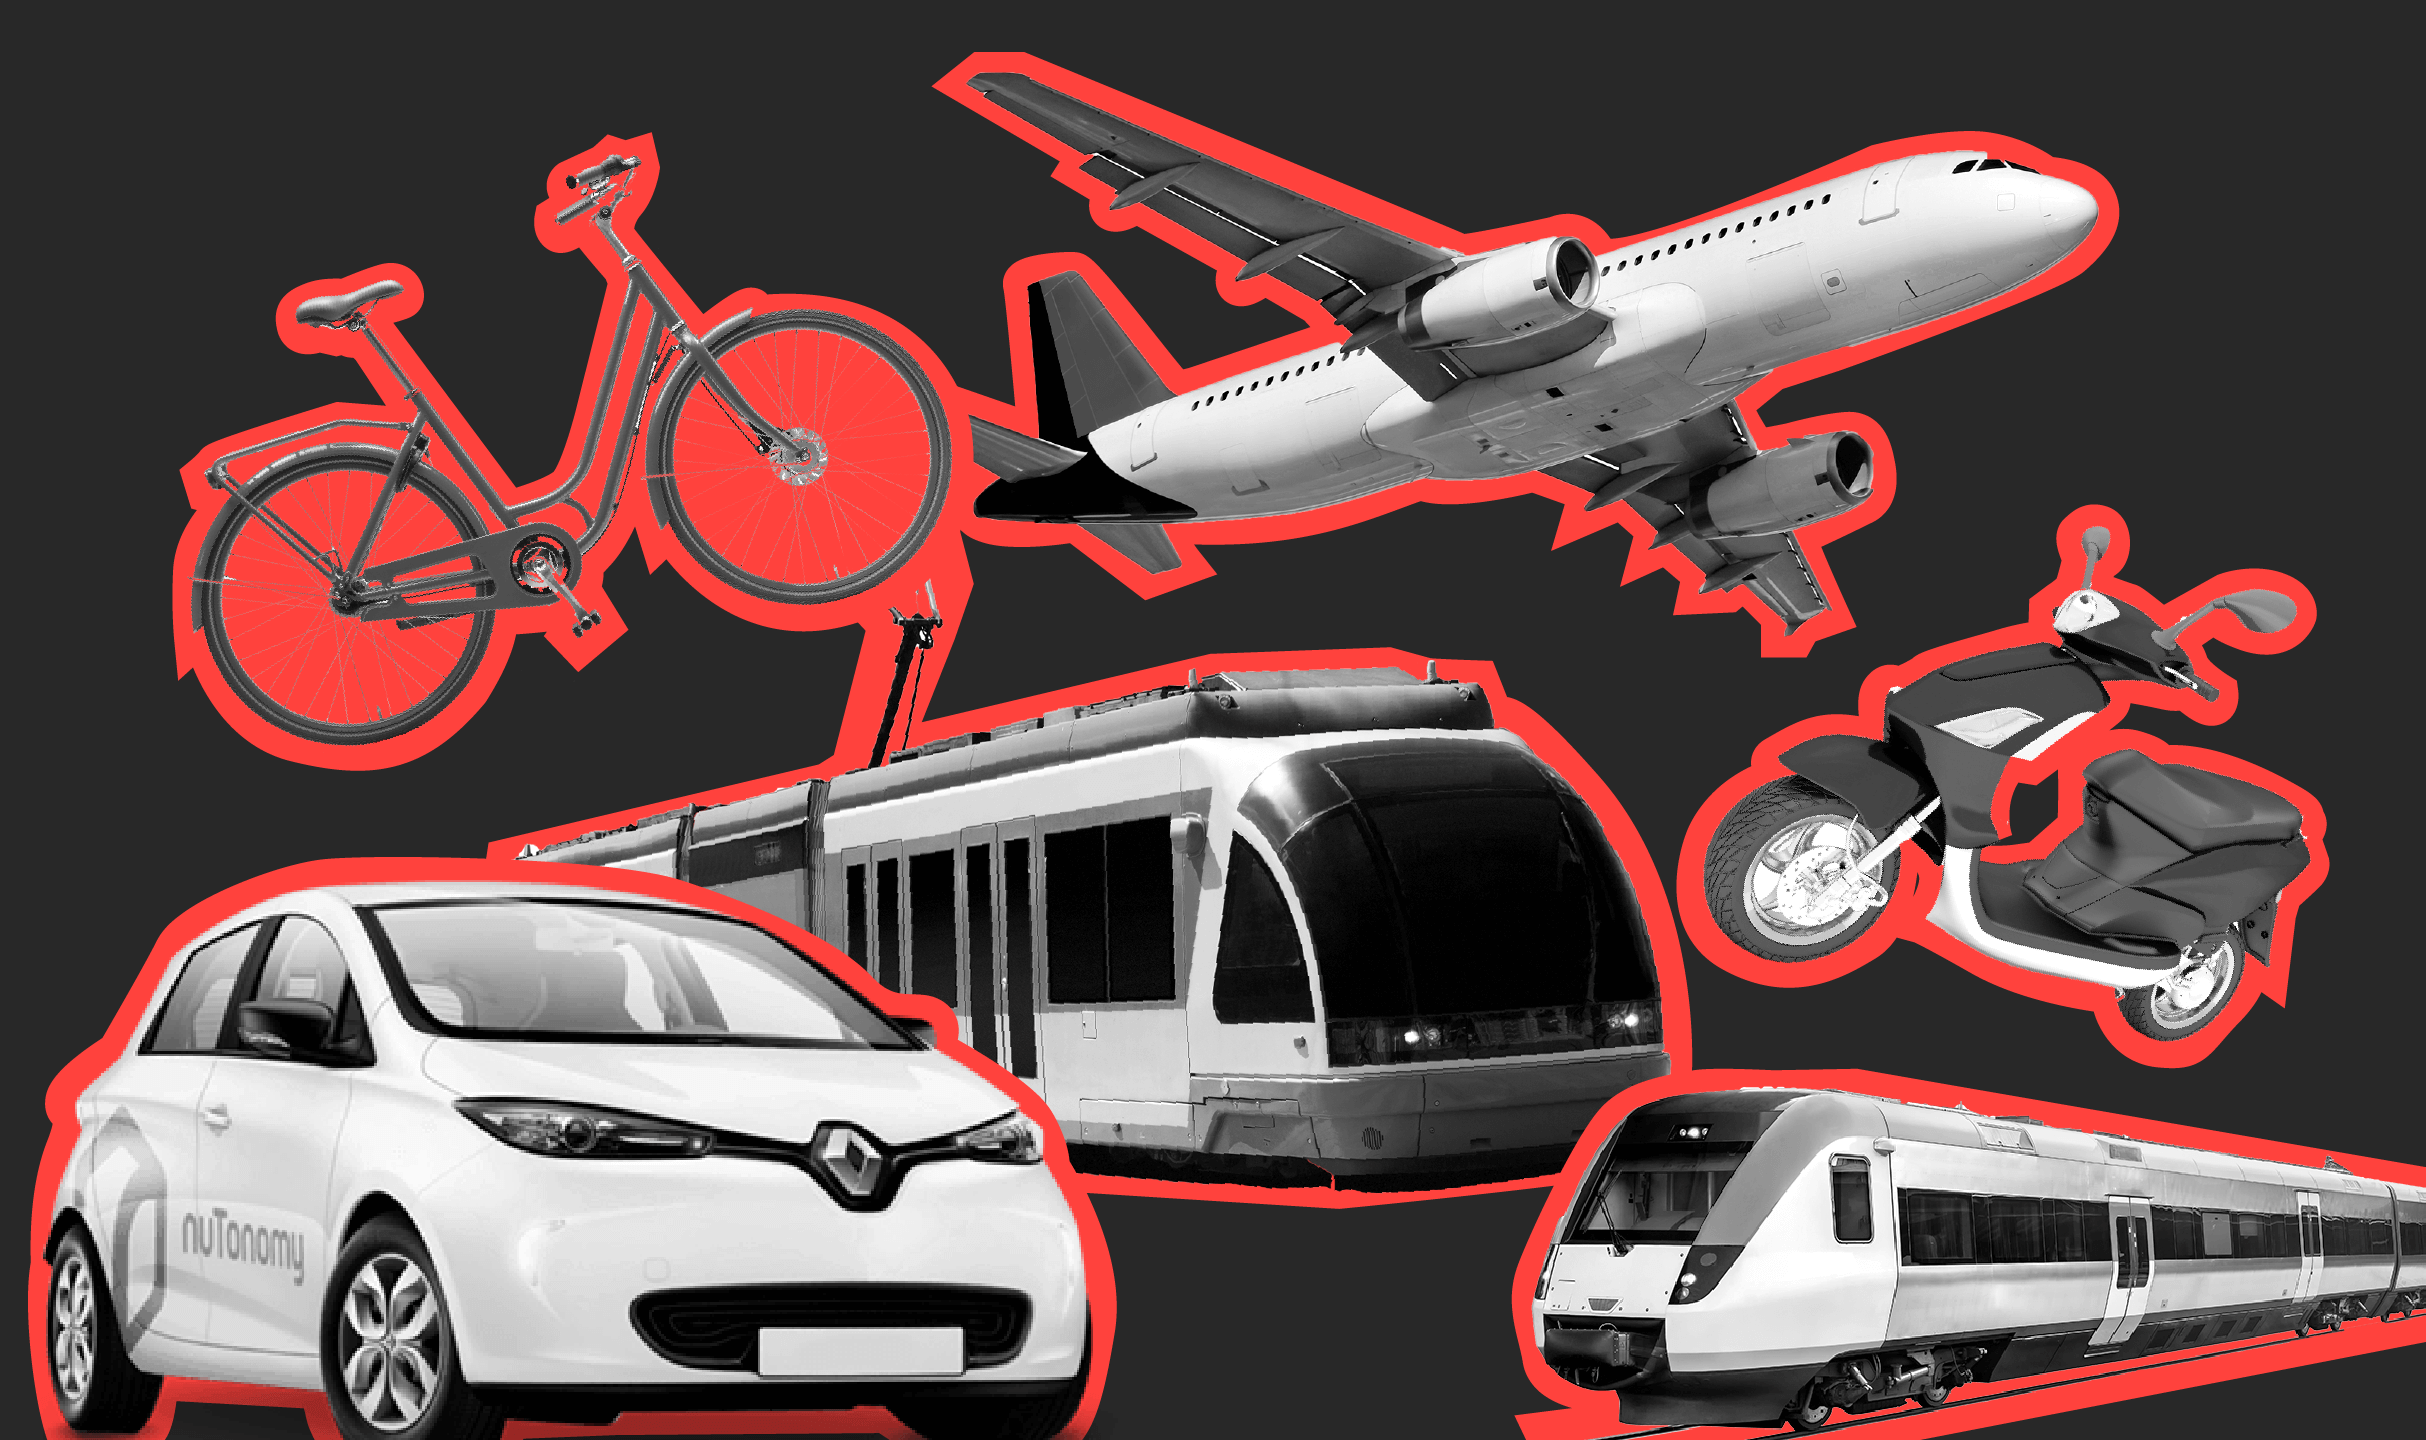 X5 transport. Транспорт и техника. XR технология транспорт. By car by plane by Train.